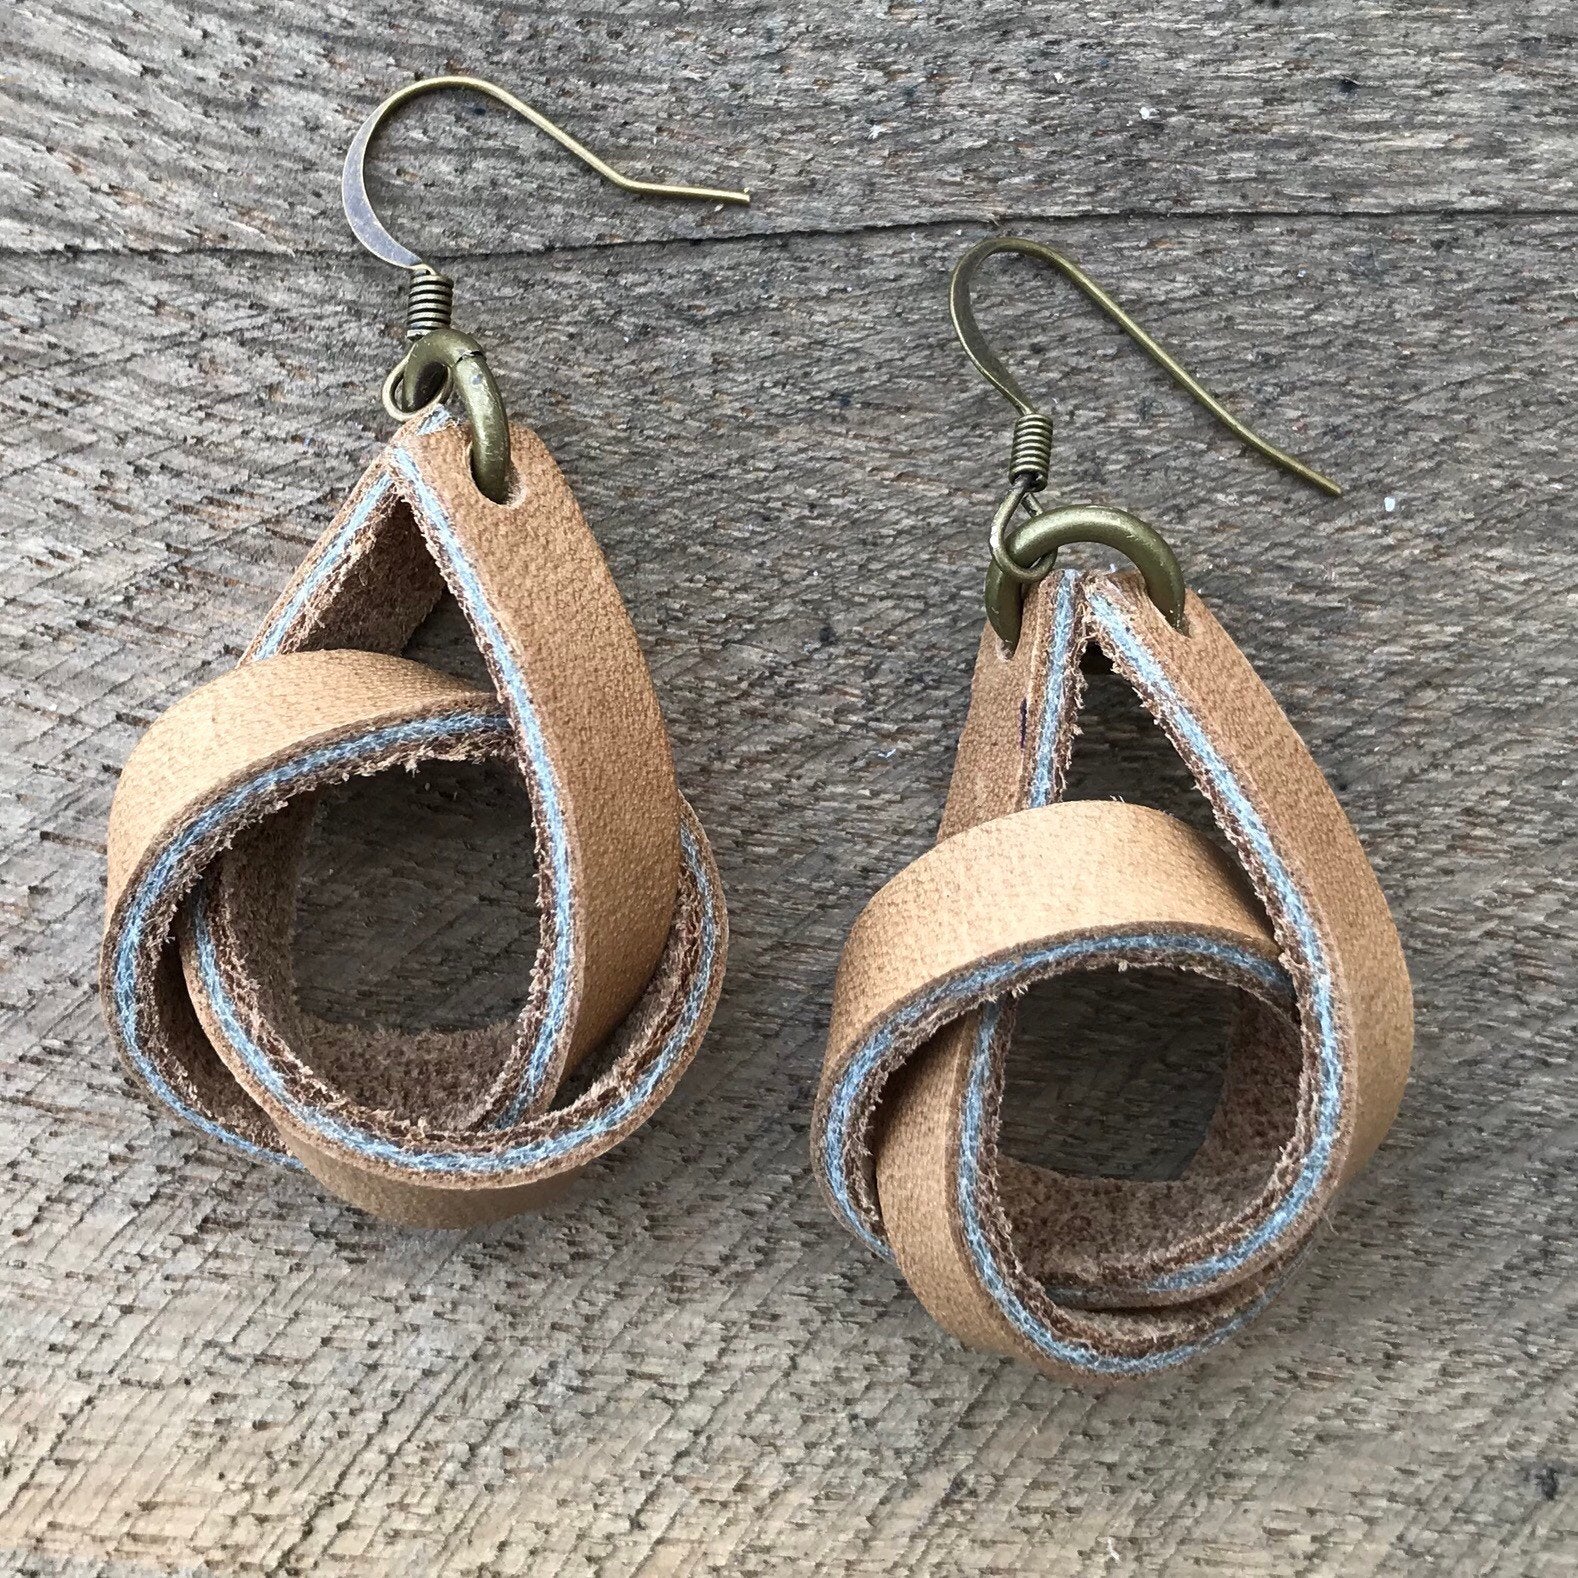 DIY Leather Earrings - Folded Leather Dangles * Moms and Crafters